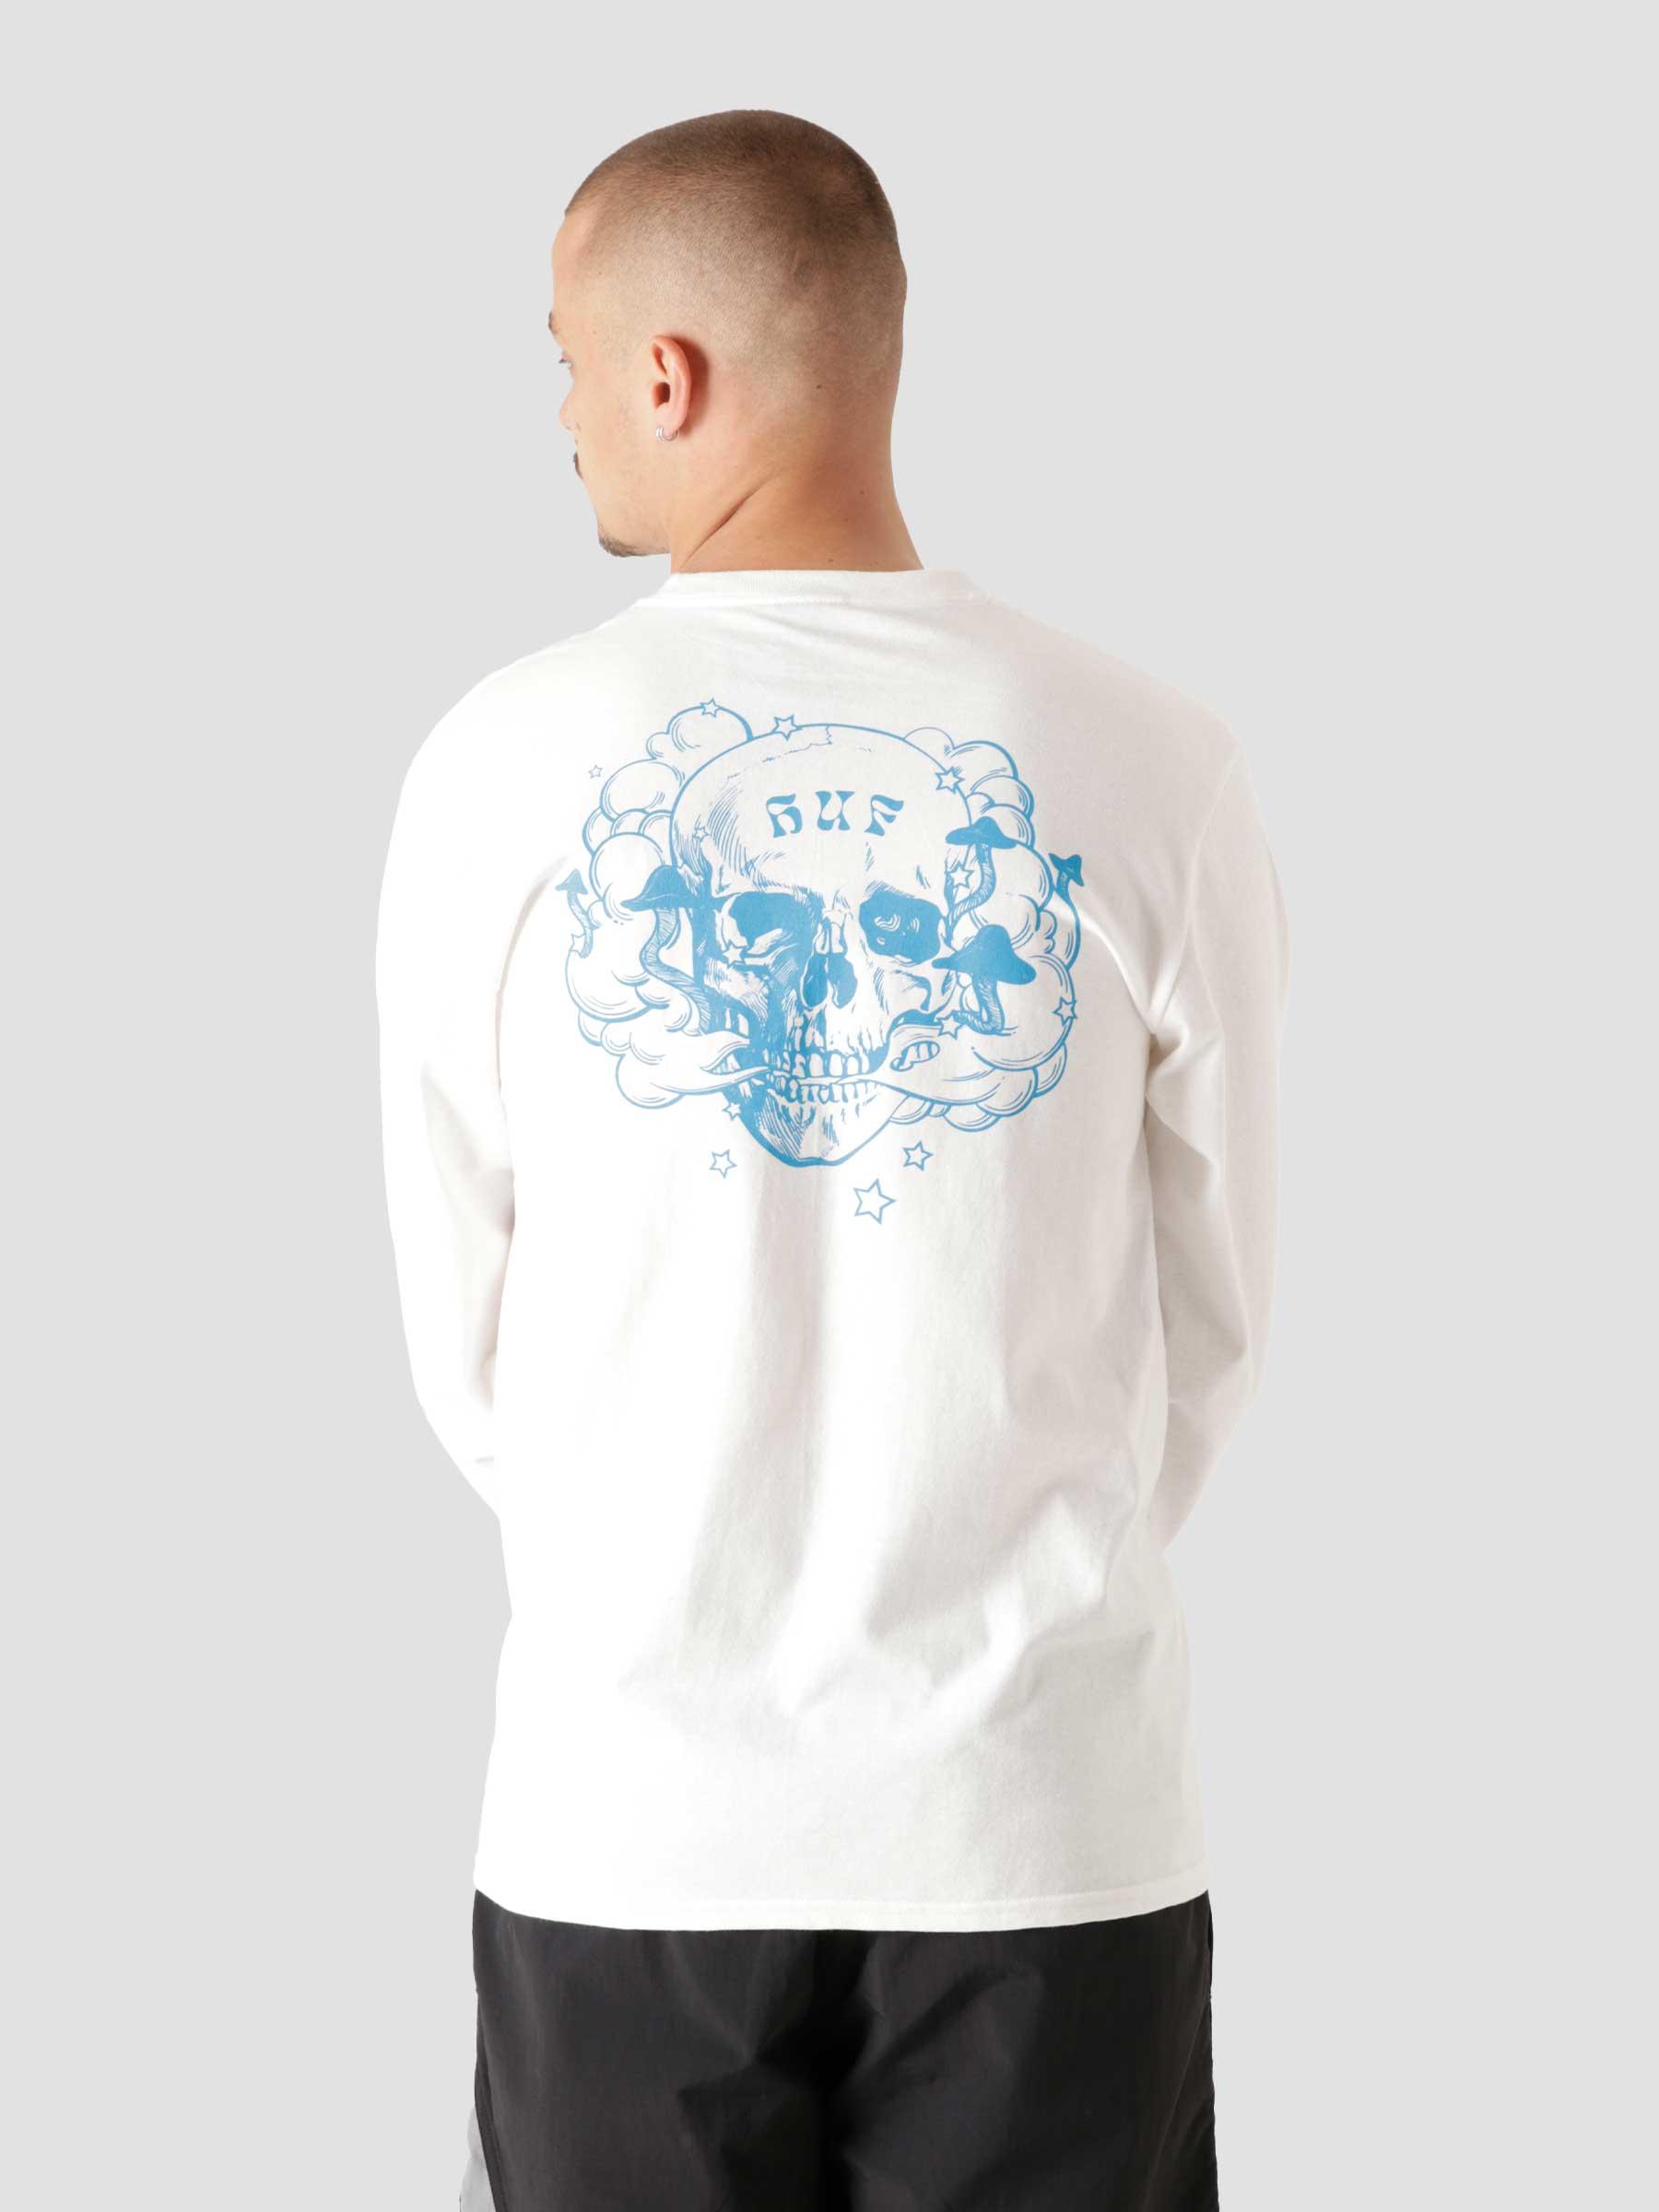 Gratefully Yours L/S Tee White TS01477